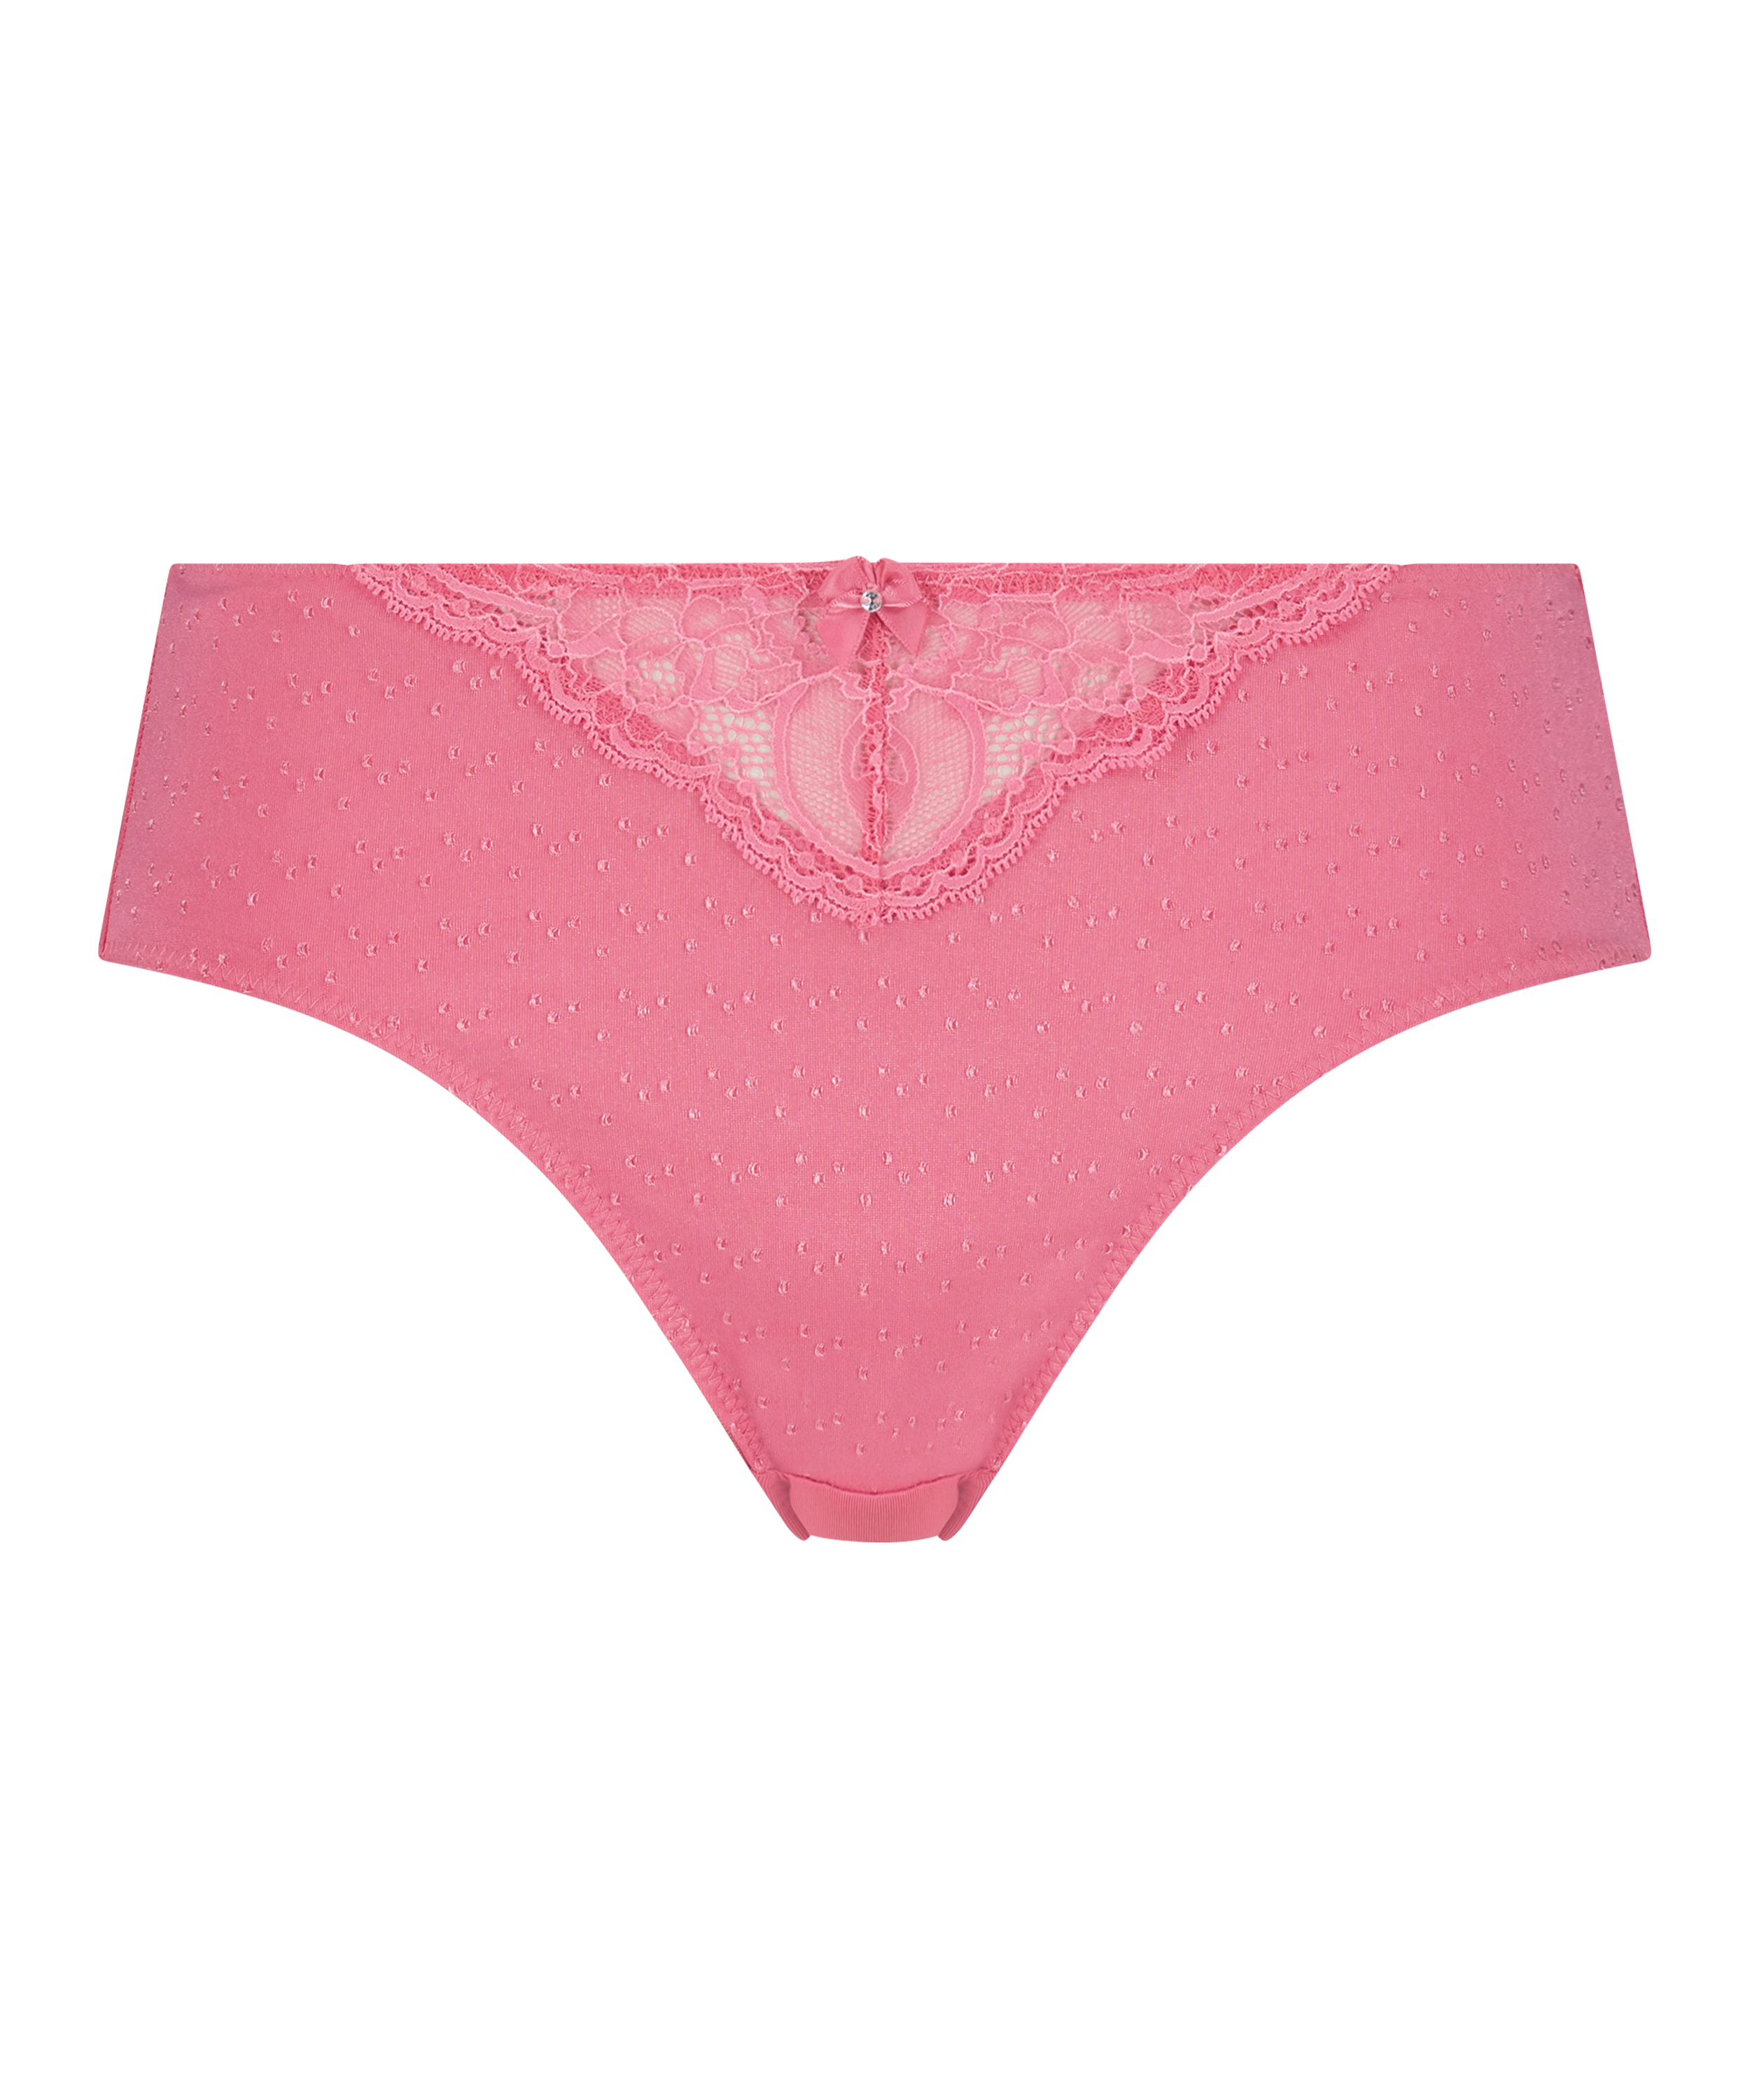 Sophie high knickers, Pink, main